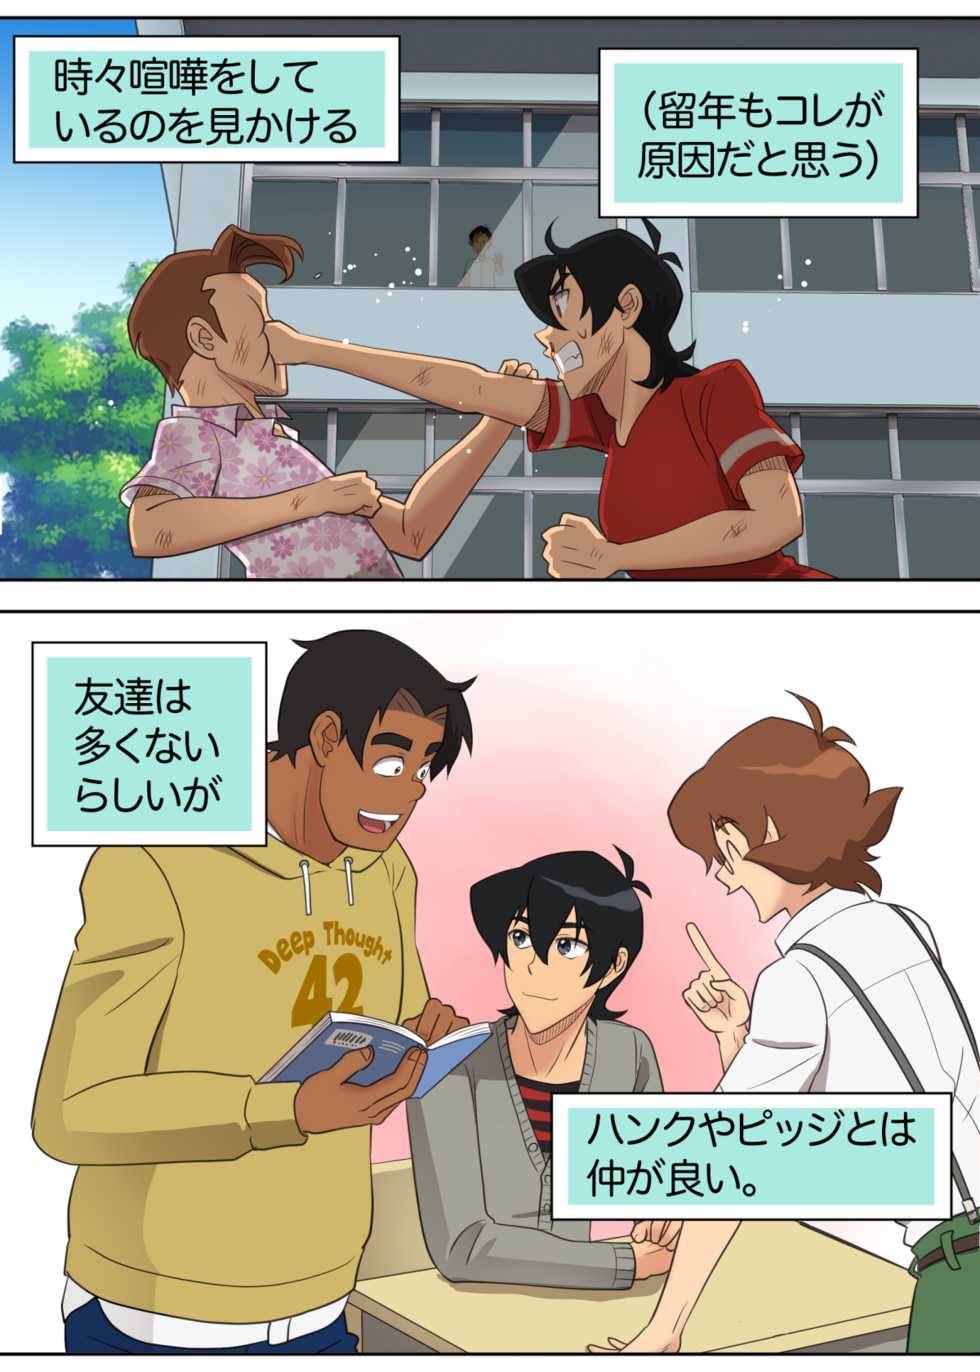 [halleseed] Otomari Party Game (Voltron: Legendary Defender) - Page 3